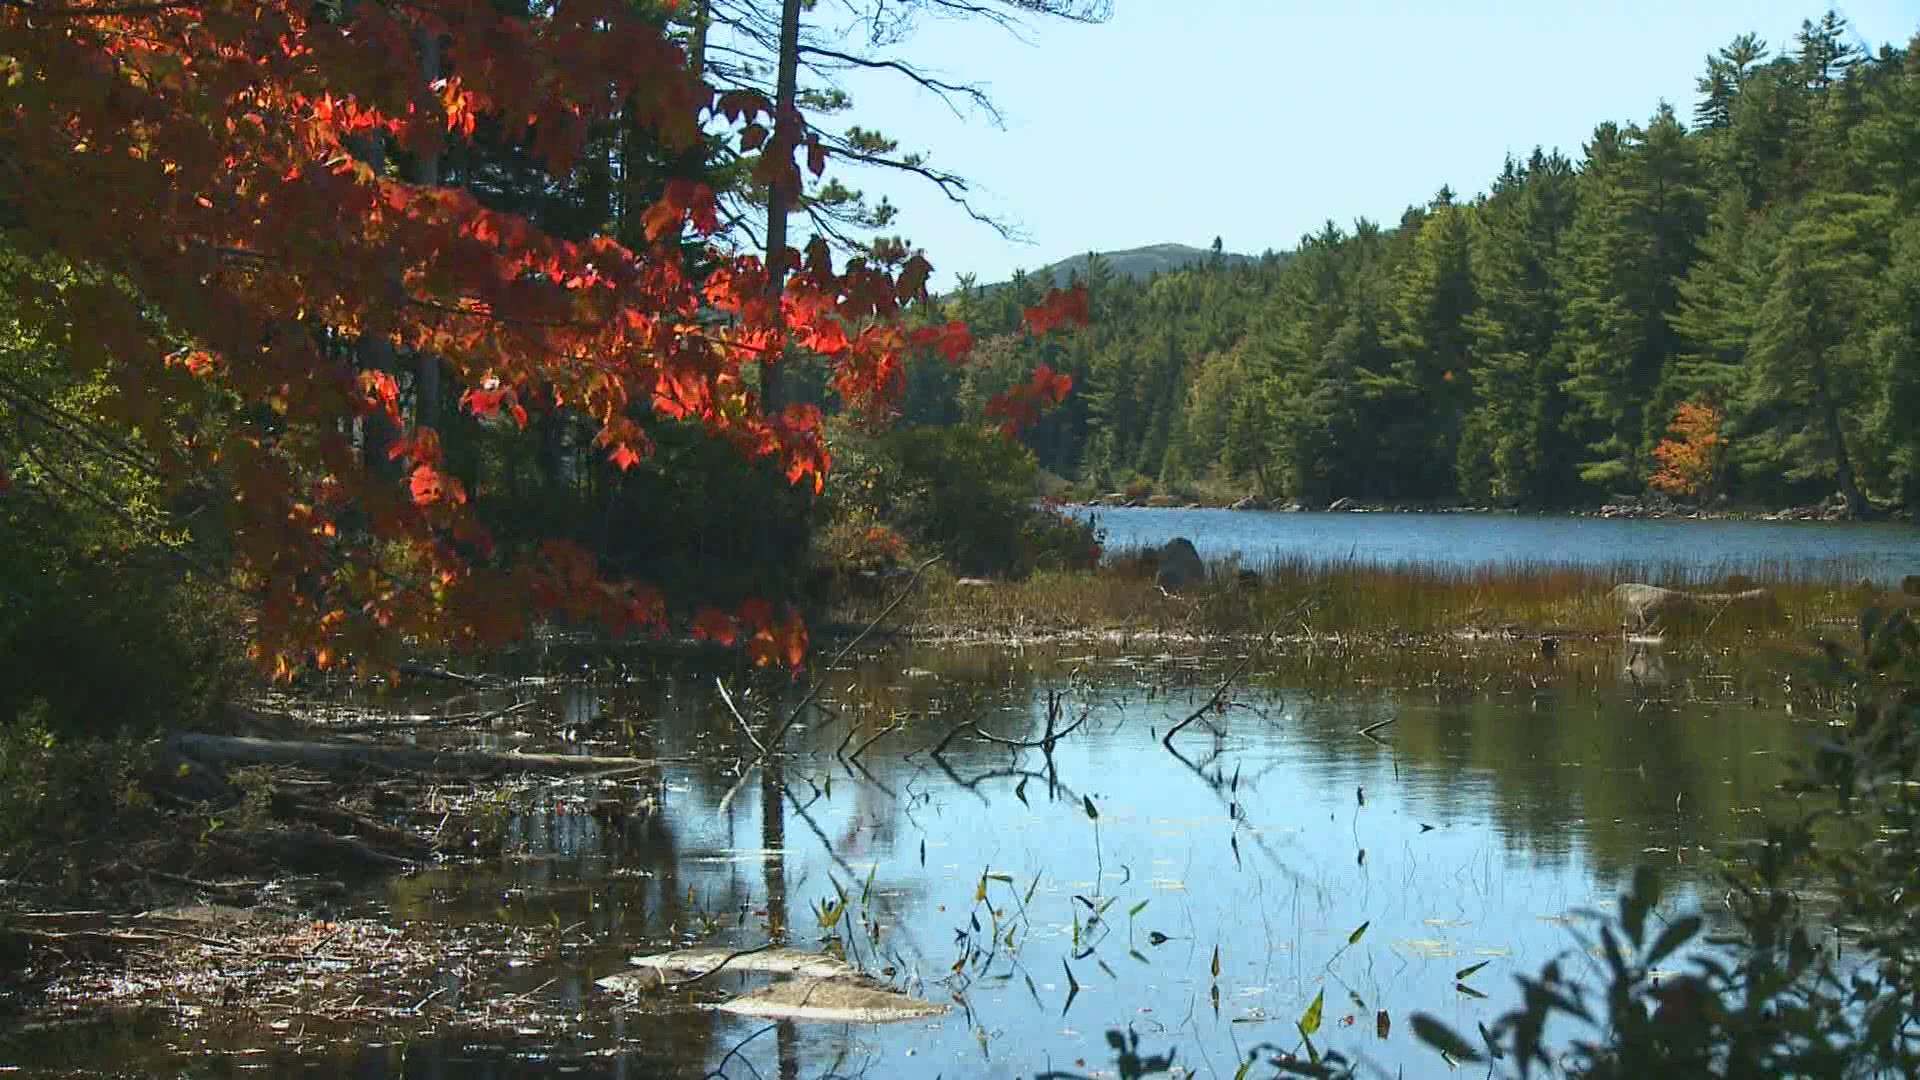 Each week, the state releases the Maine Foliage Report; but how do employees track the colors that seem to change so quickly?